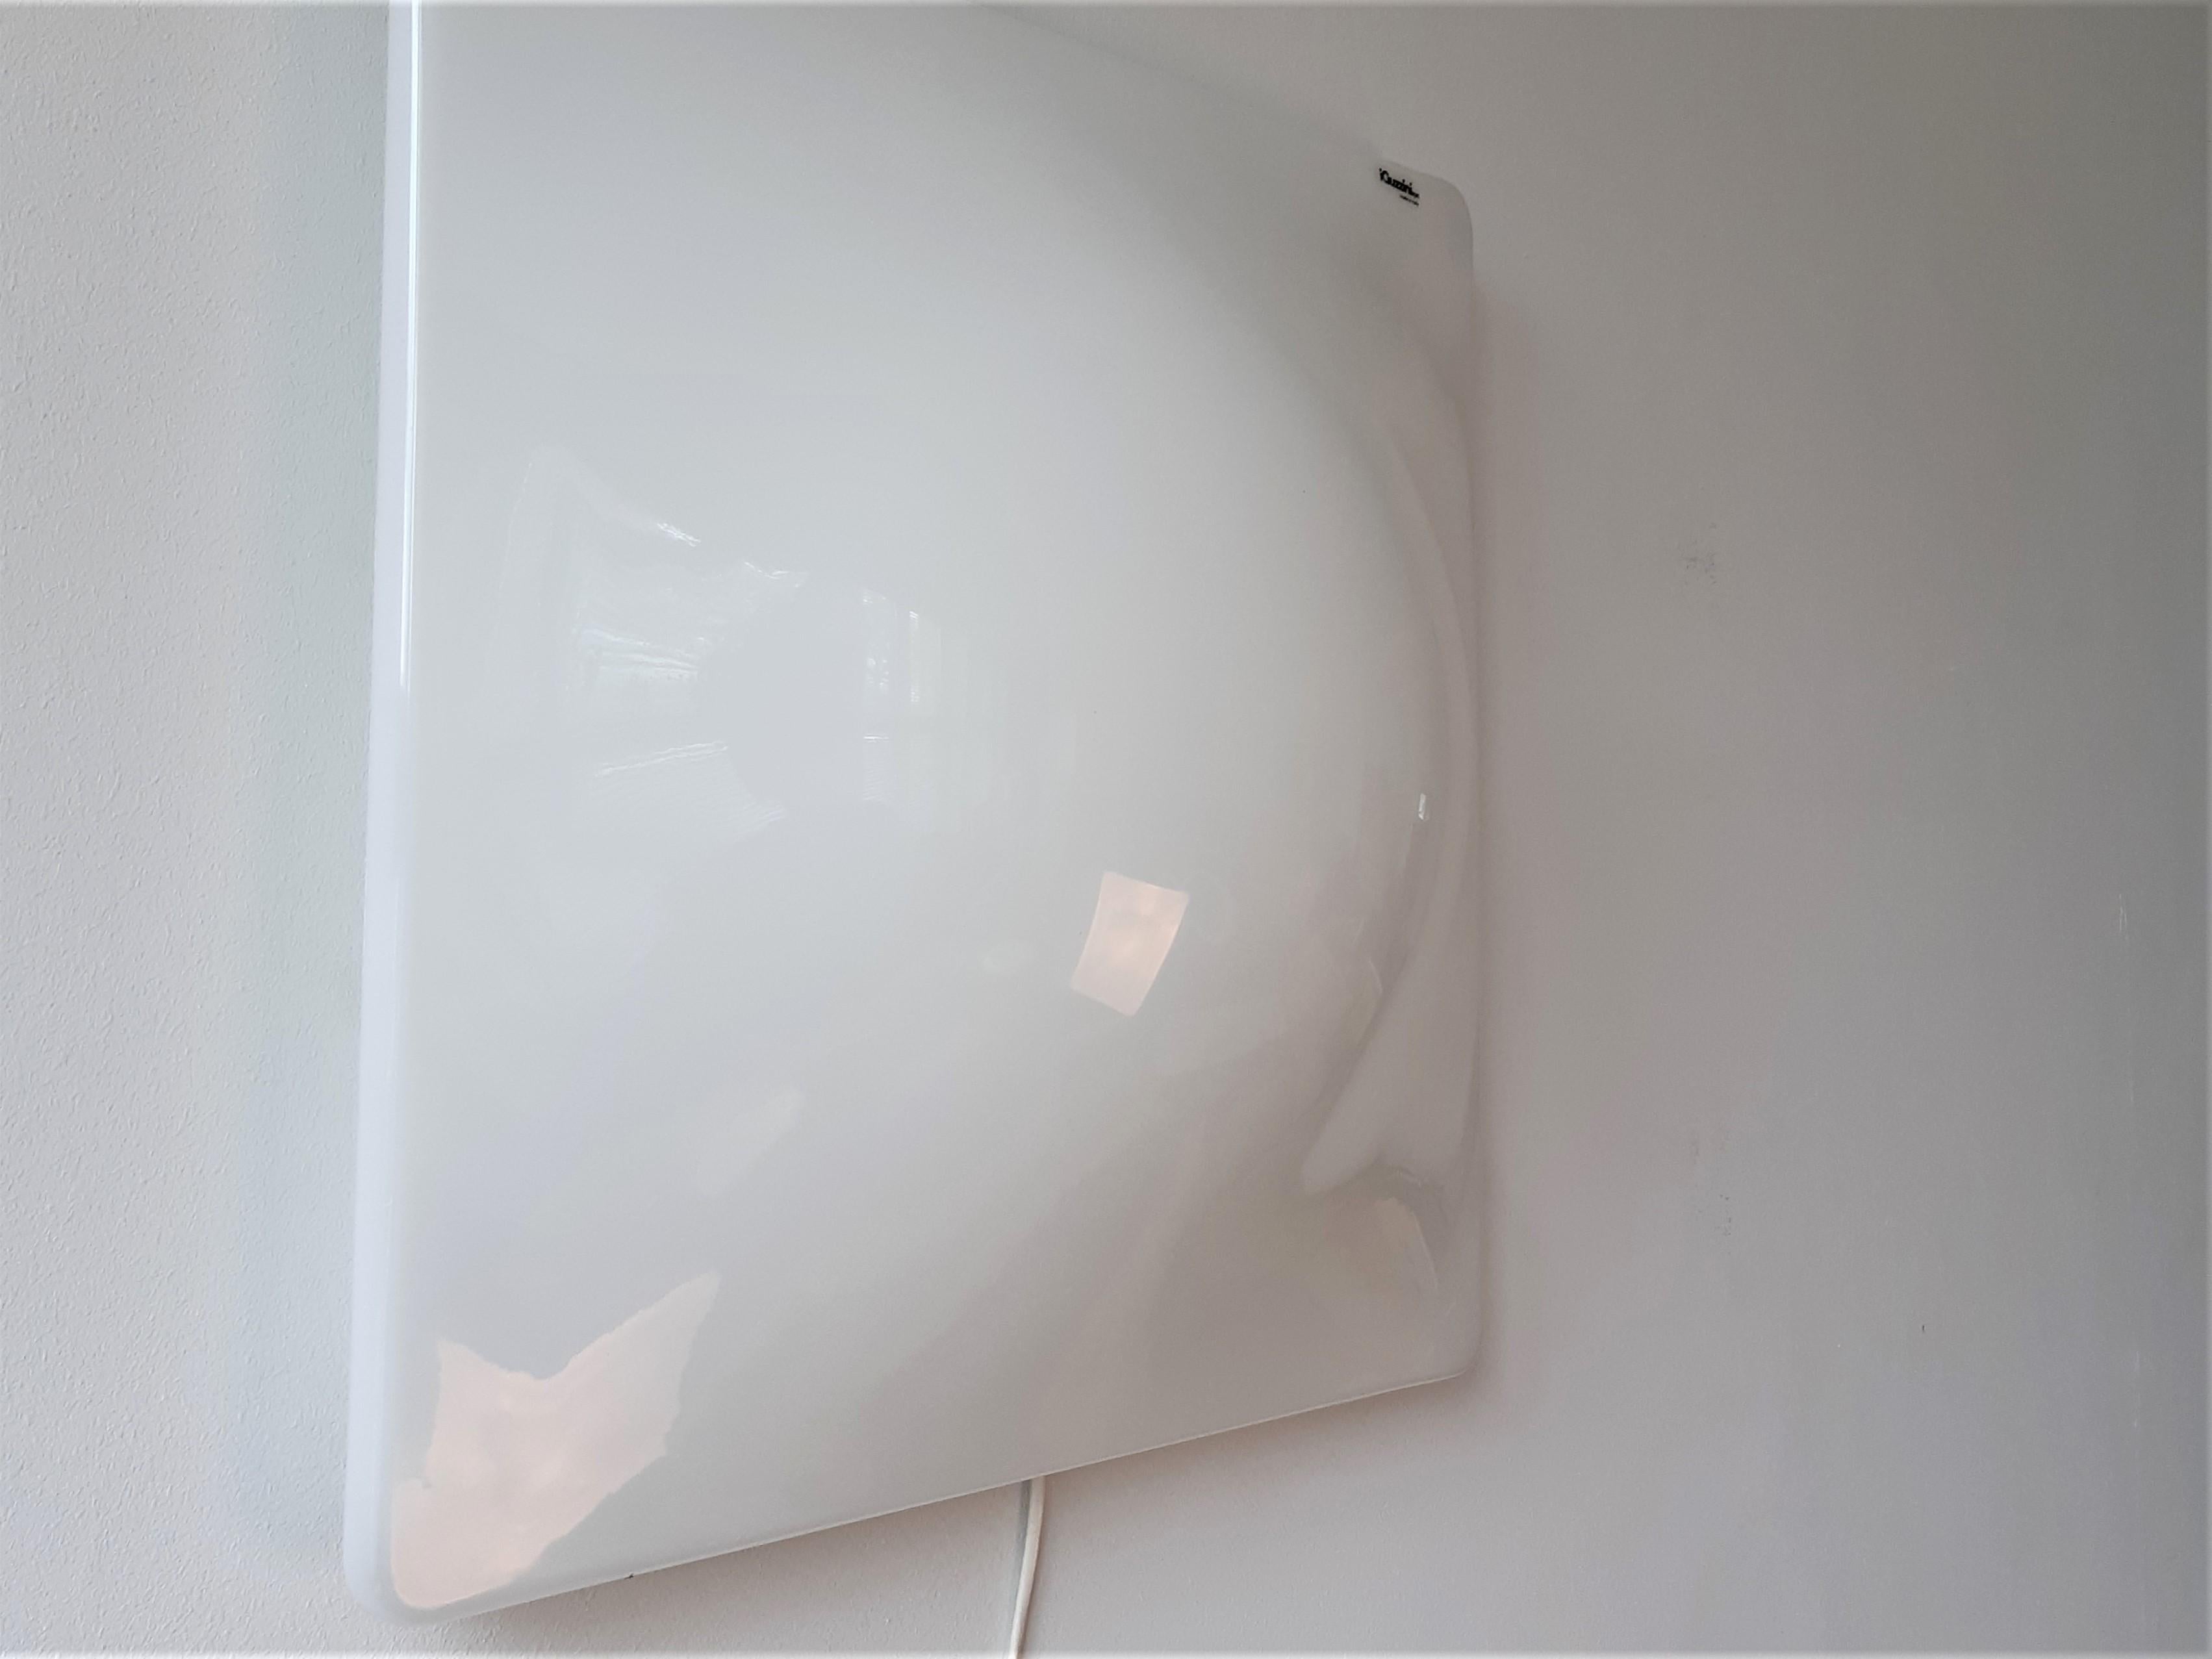 This fantastic flushmount, model 'Dada' was designed and made by IGuzzini in the 1970's in Italy. It has a square white curved acrylic lampshade and a white painted square metal (iron) ceiling mount. The curves makes it elegant and minimalistic. A